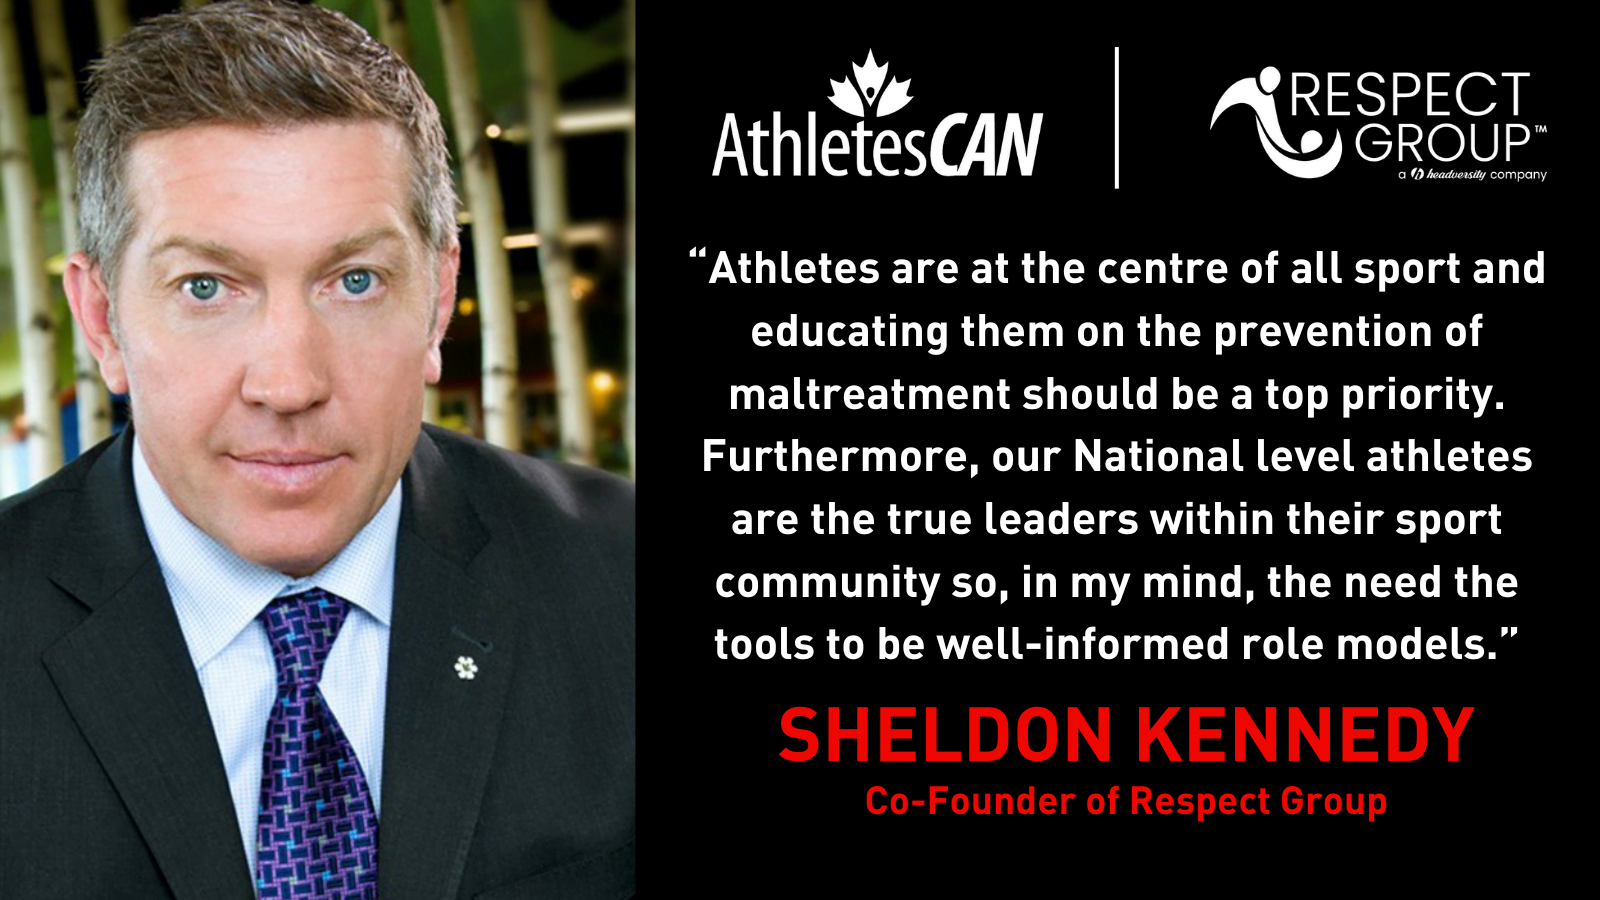 "Athletes are at the centre of all sport and educating them on the prevention of maltreatment should be a top priority. Furthermore, our National level athletes are the true leaders within their sport community so, in my mind, the need the tools to be well-informed role models." Sheldon Kennedy, Co-Founder Respect Group